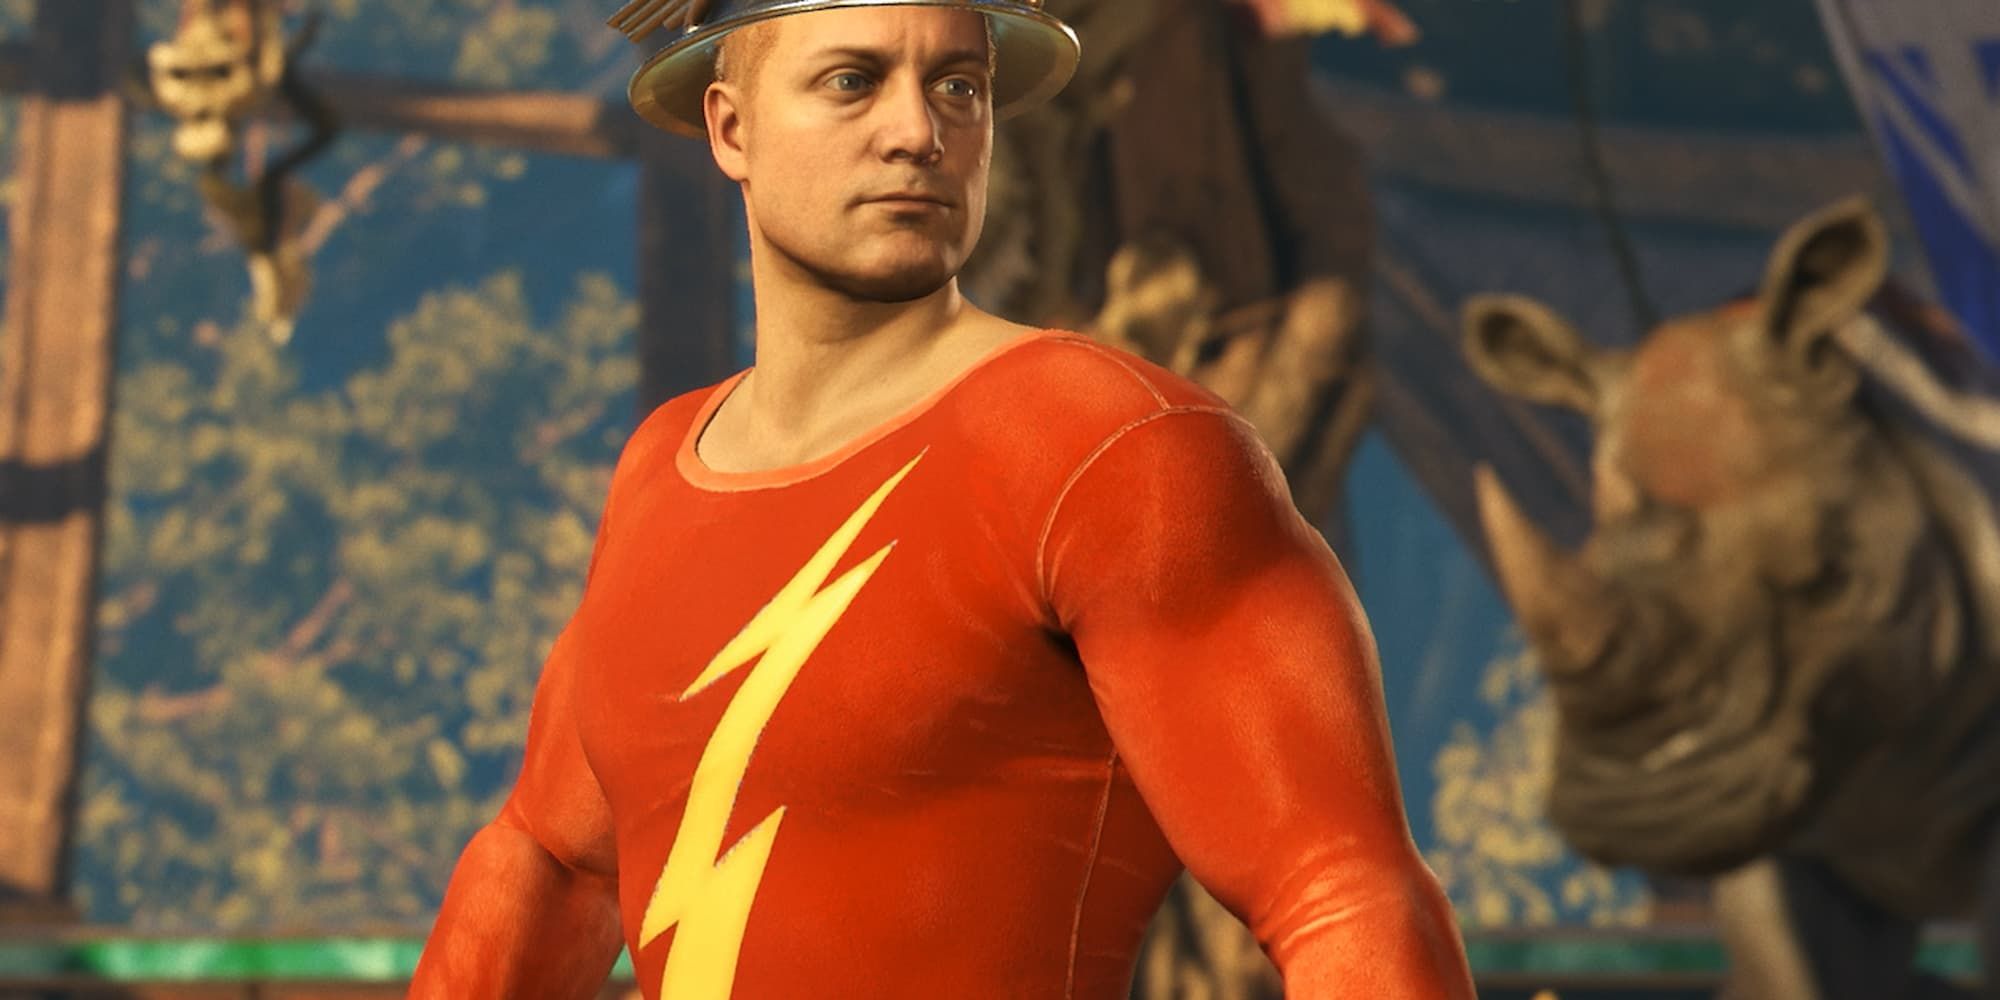 Jay Garrick appears as The Flash and looks ready to speed into battle.